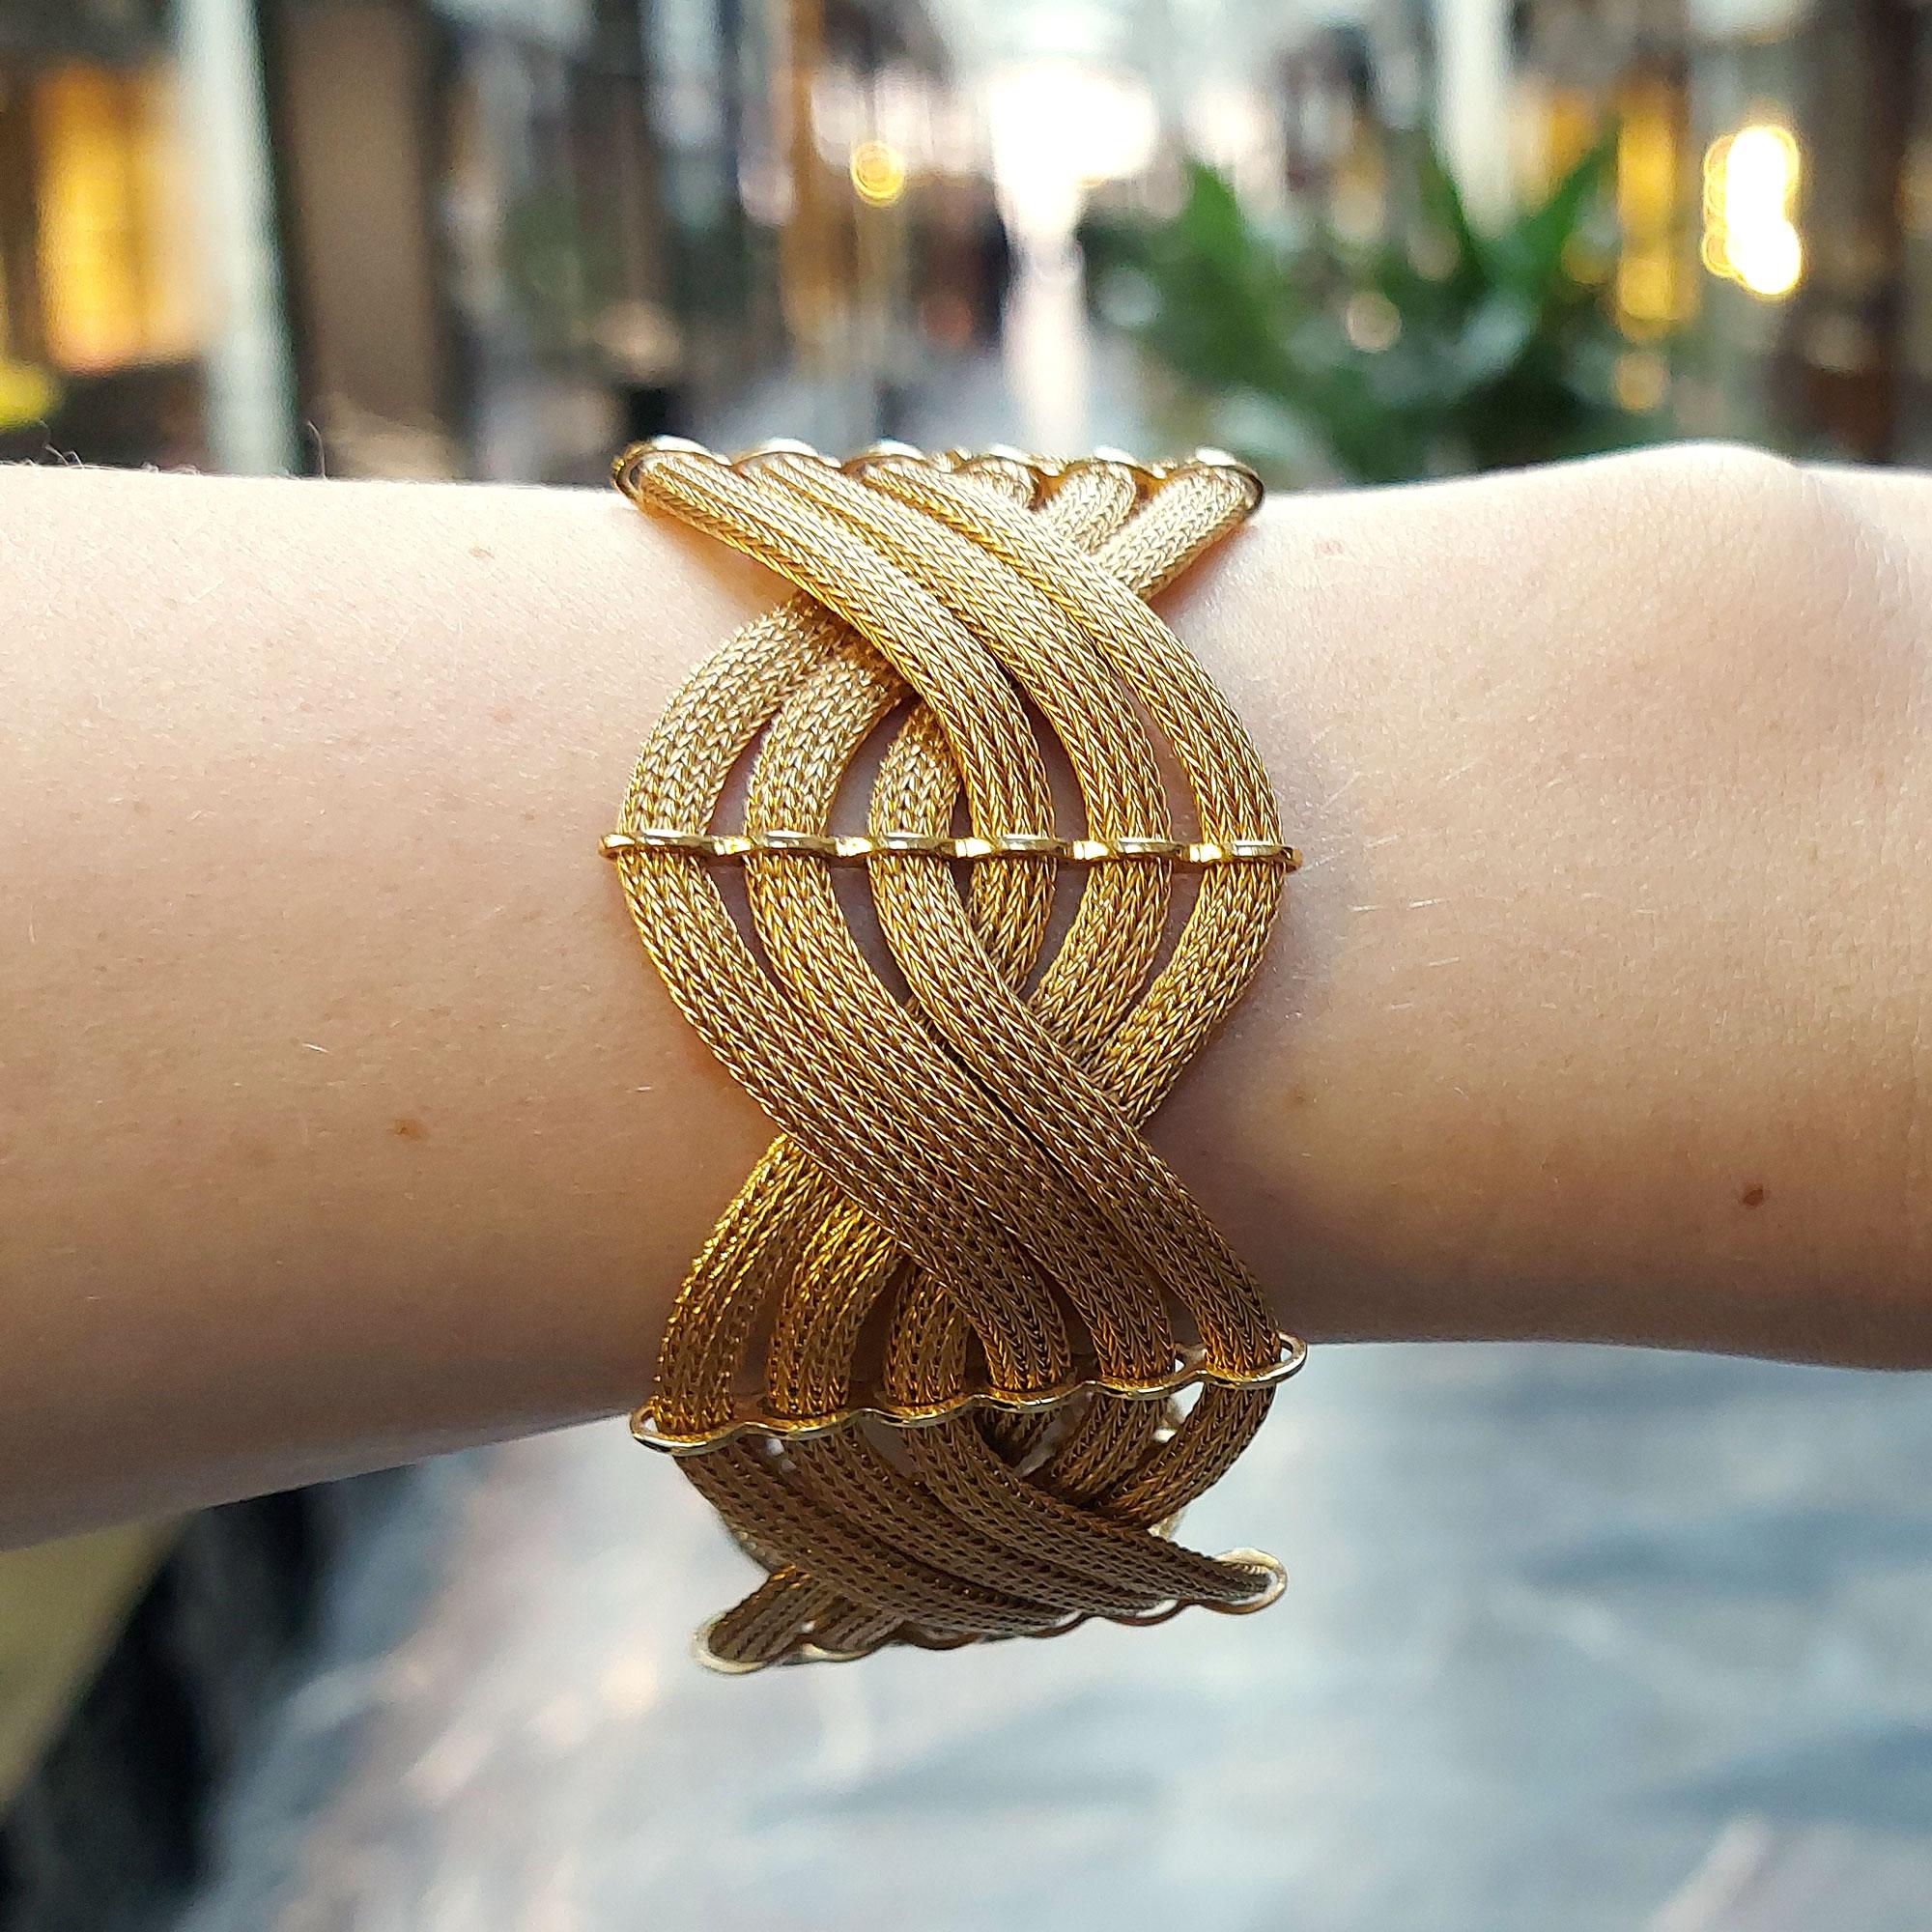 A sensational 1960's Italian braided bracelet set in 18k rose gold. This piece is designed as a double plait of six spiga ropes - three ropes going each way. These are held into place by six fine gold spacers surrounding each rope individually.